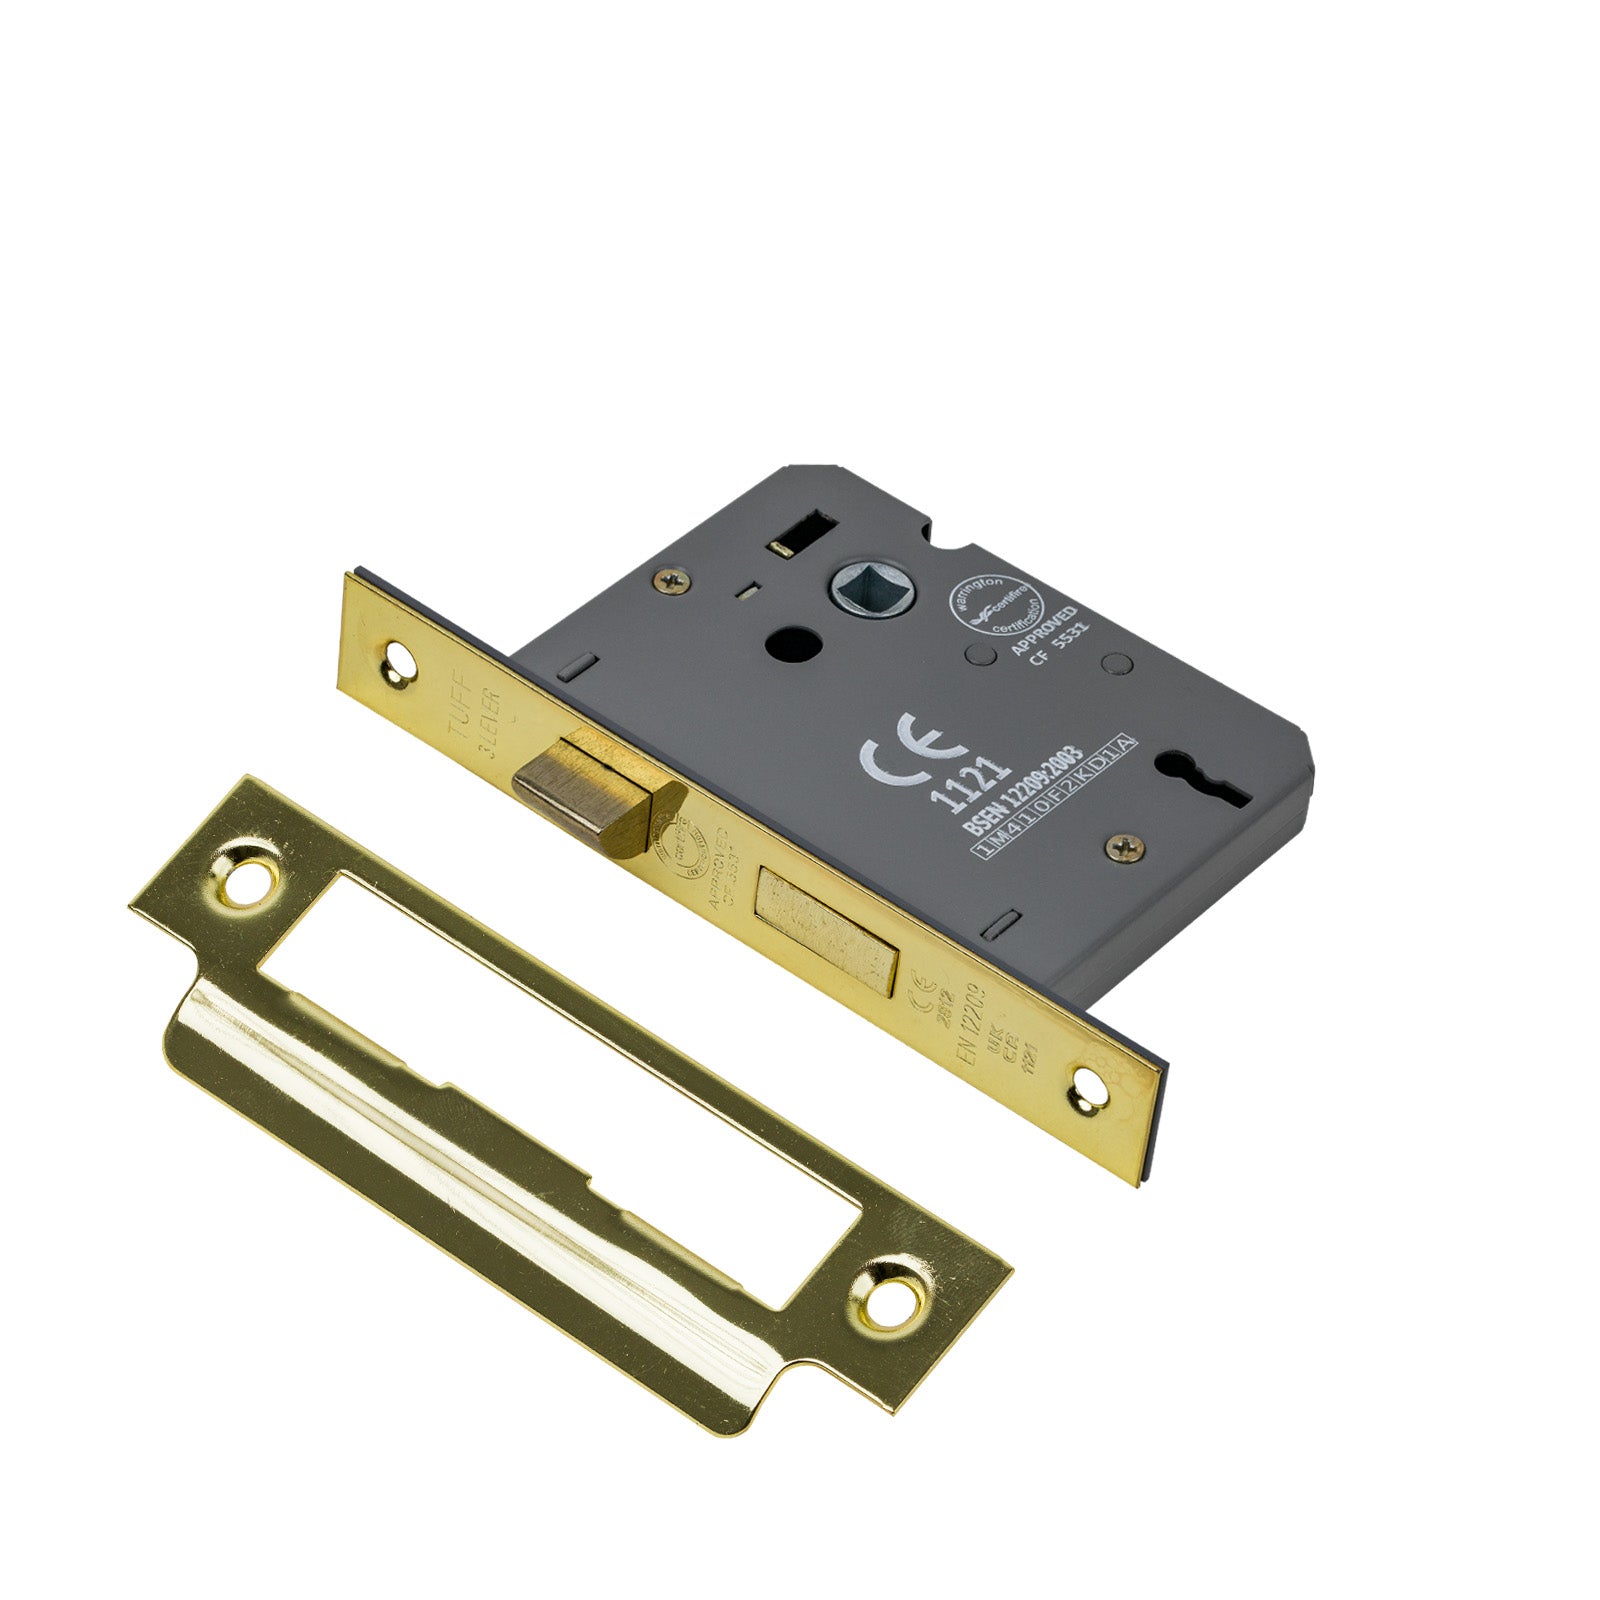 SHOW 3 Lever Sash Lock - 3 Inch with Polished brass finished forend and striker plate